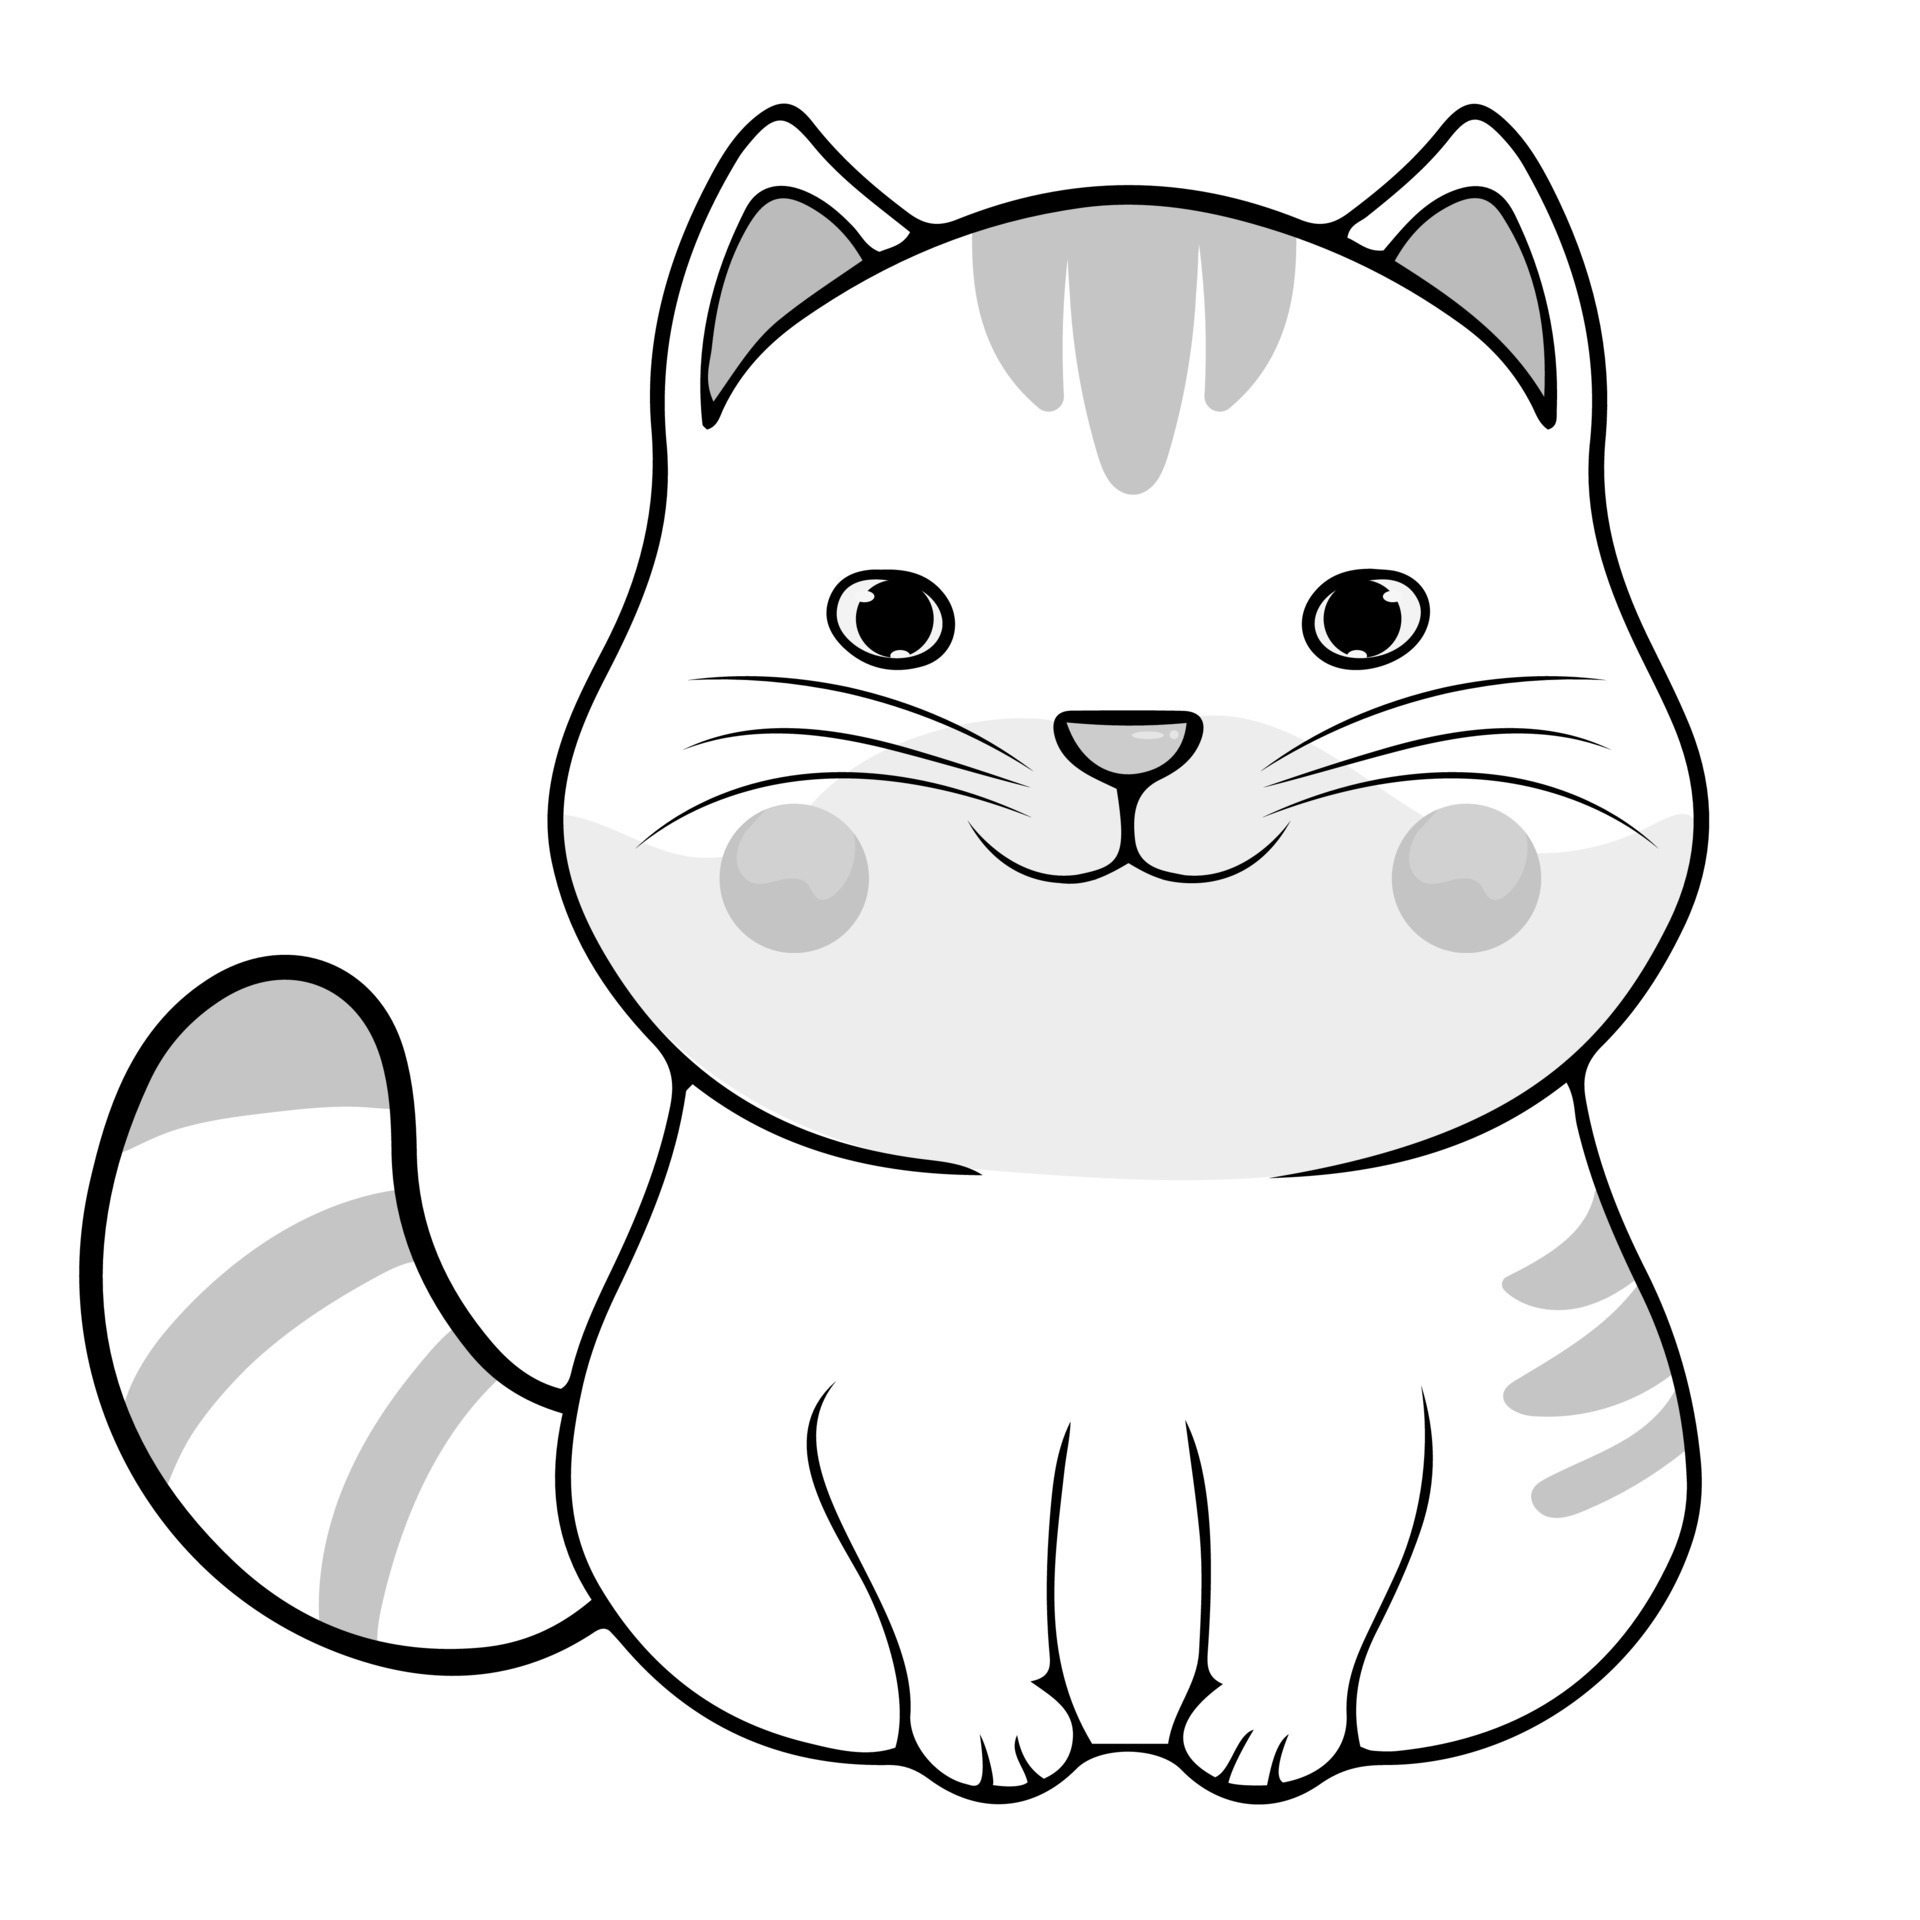 Purrfectly Entertaining Kawaii Cat Coloring Pages for Kids to Enjoy